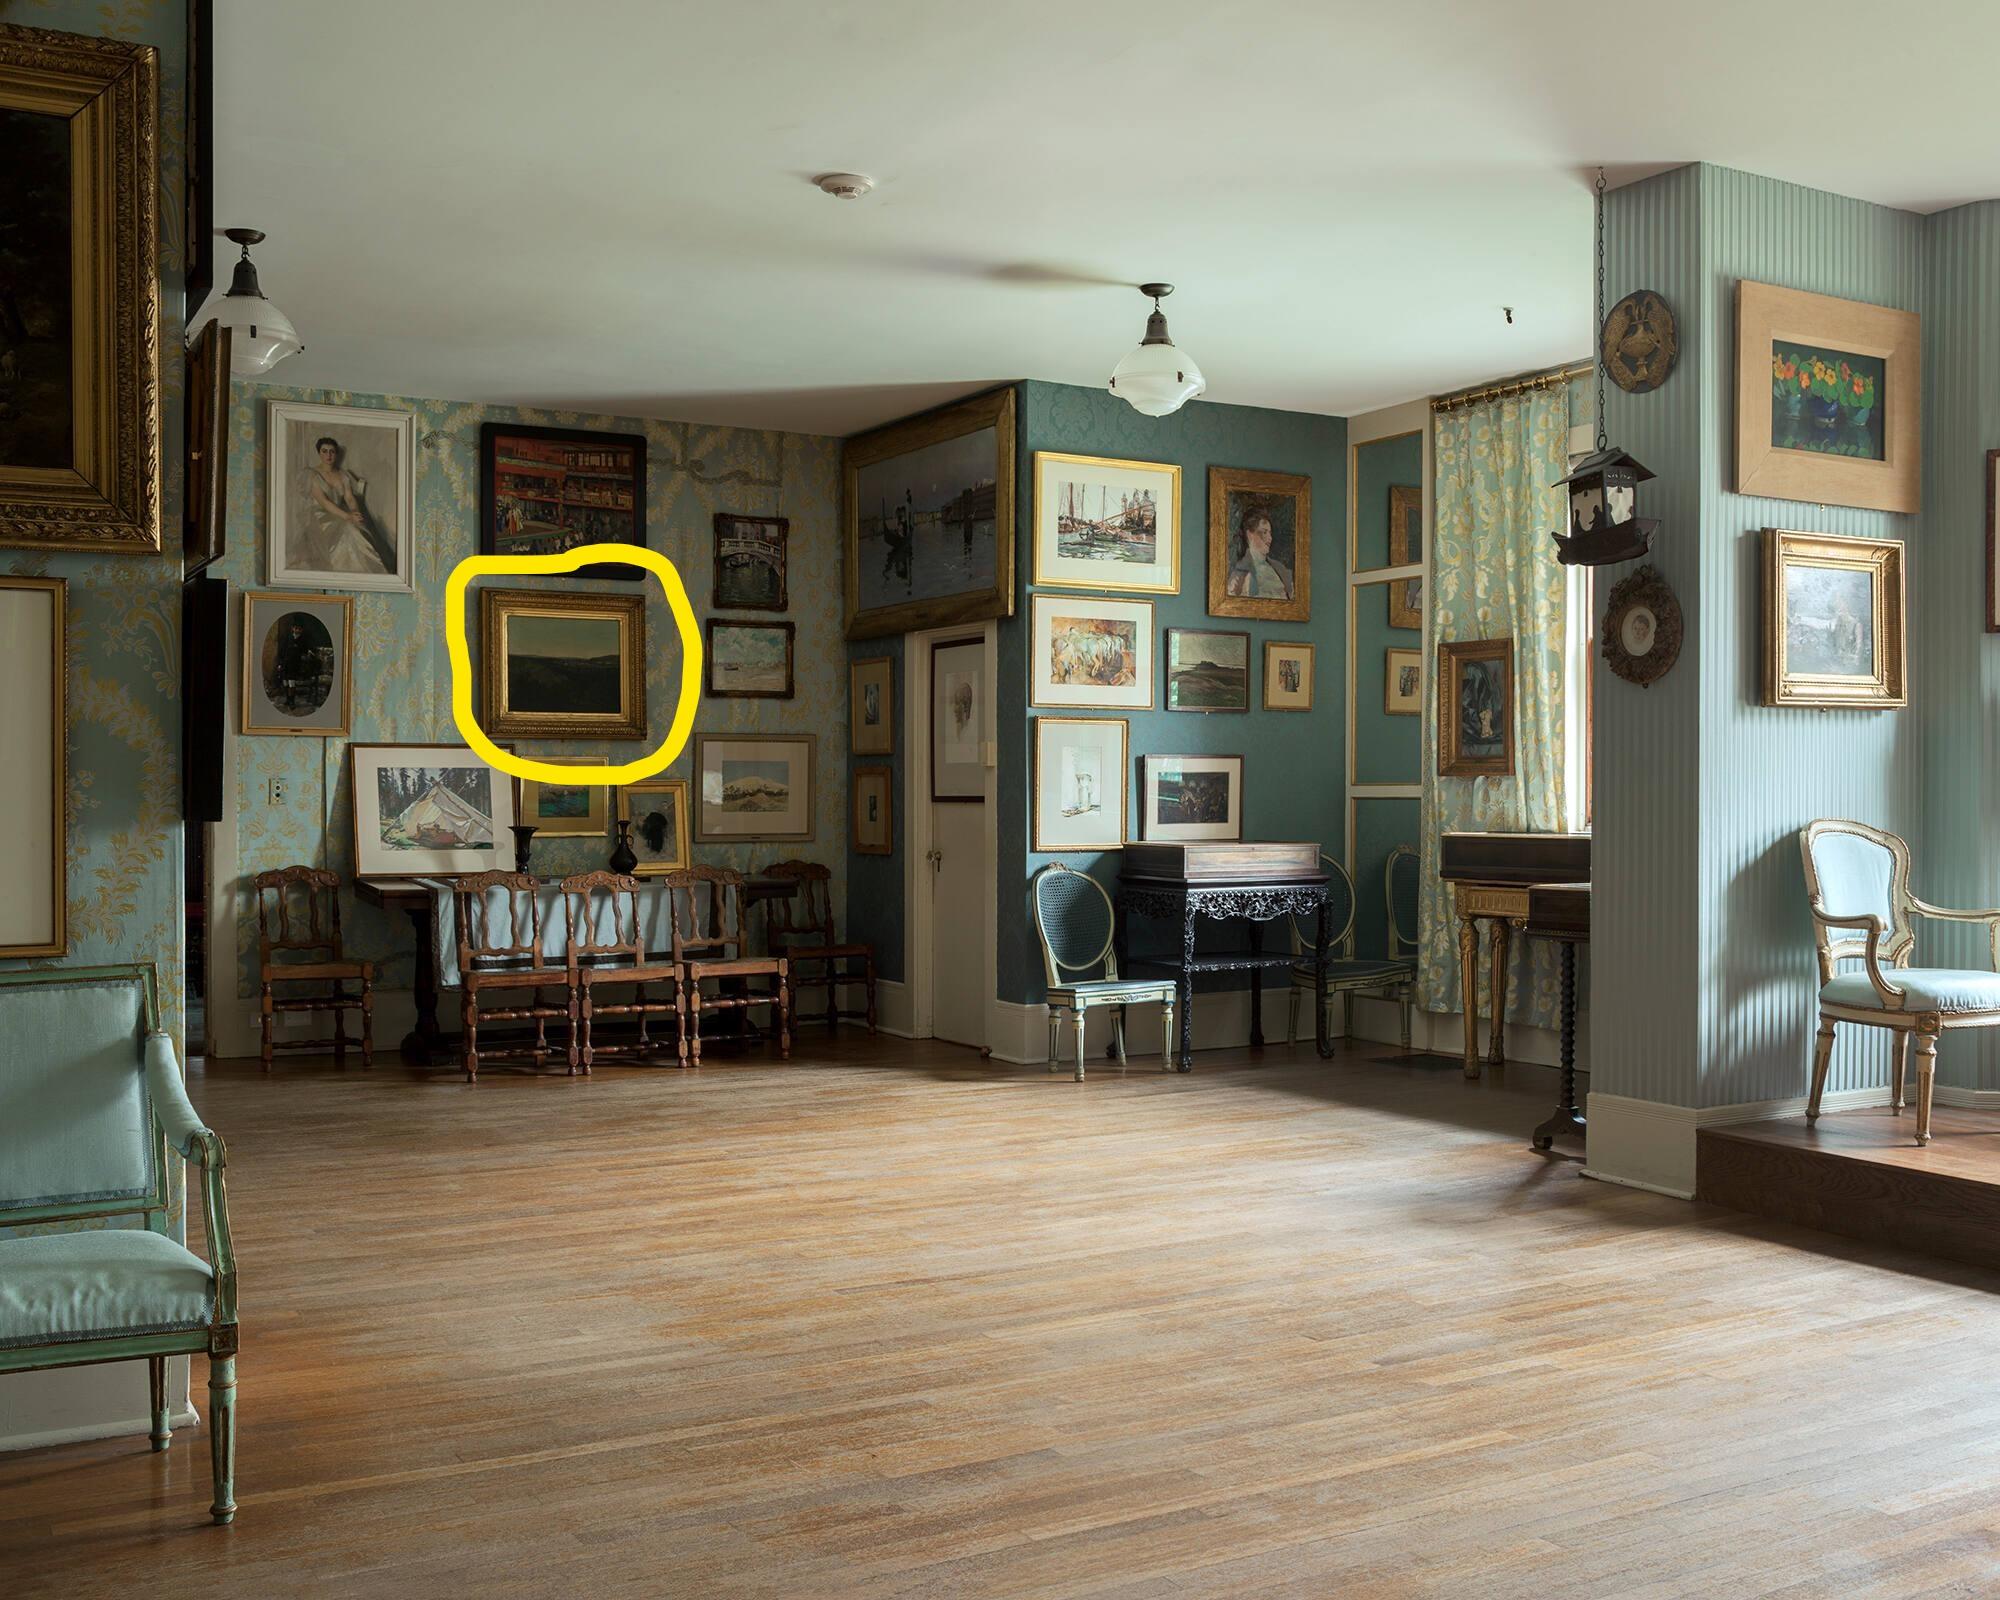 A photograph of the Gardner Museum’s Blue Room, one of the museum’s galleries, with hardwood floors, and several framed paintings hanging on blue walls with one of the paintings circled in yellow.